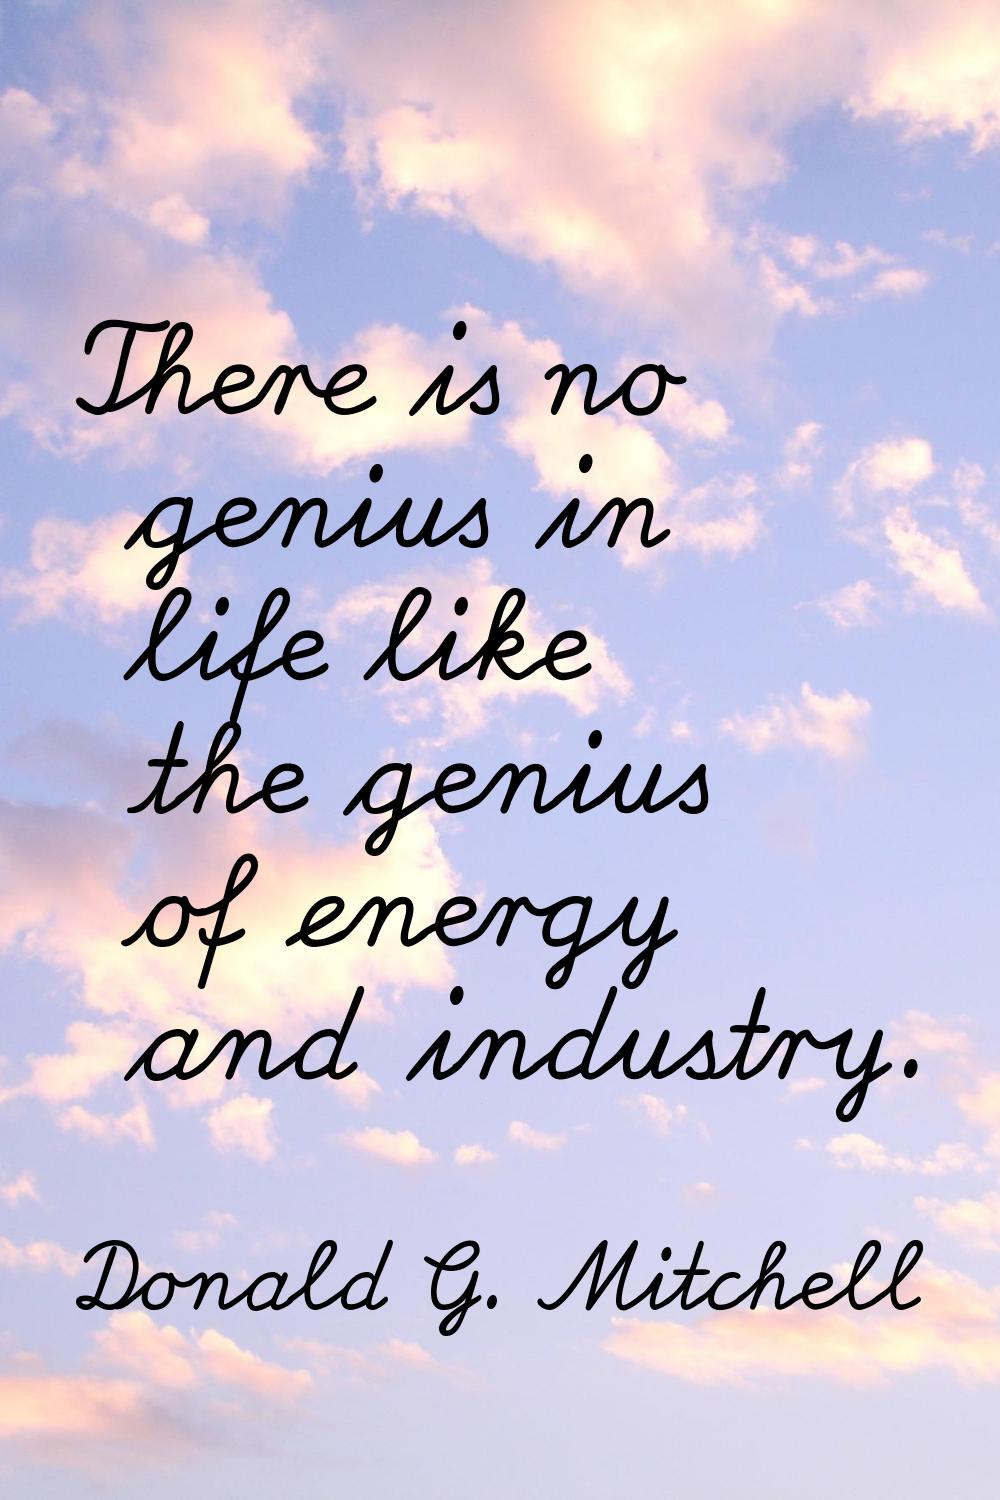 There is no genius in life like the genius of energy and industry.